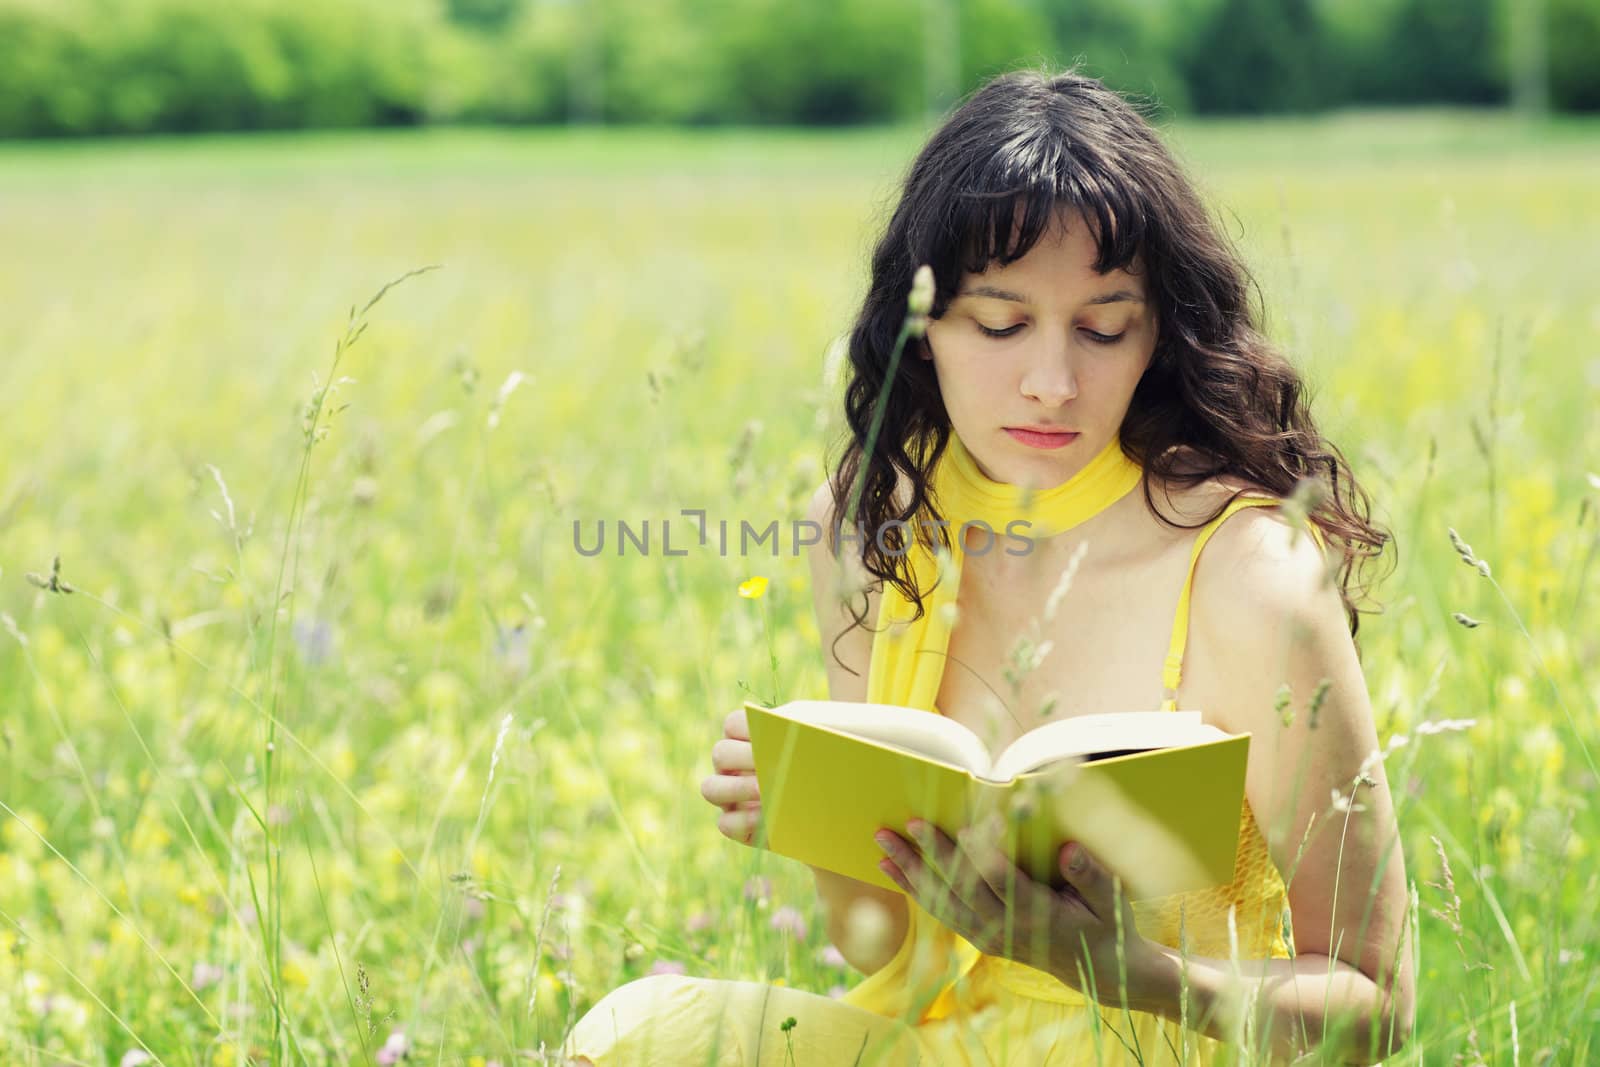 beautiful young woman reading book in a field full of yellow flowers